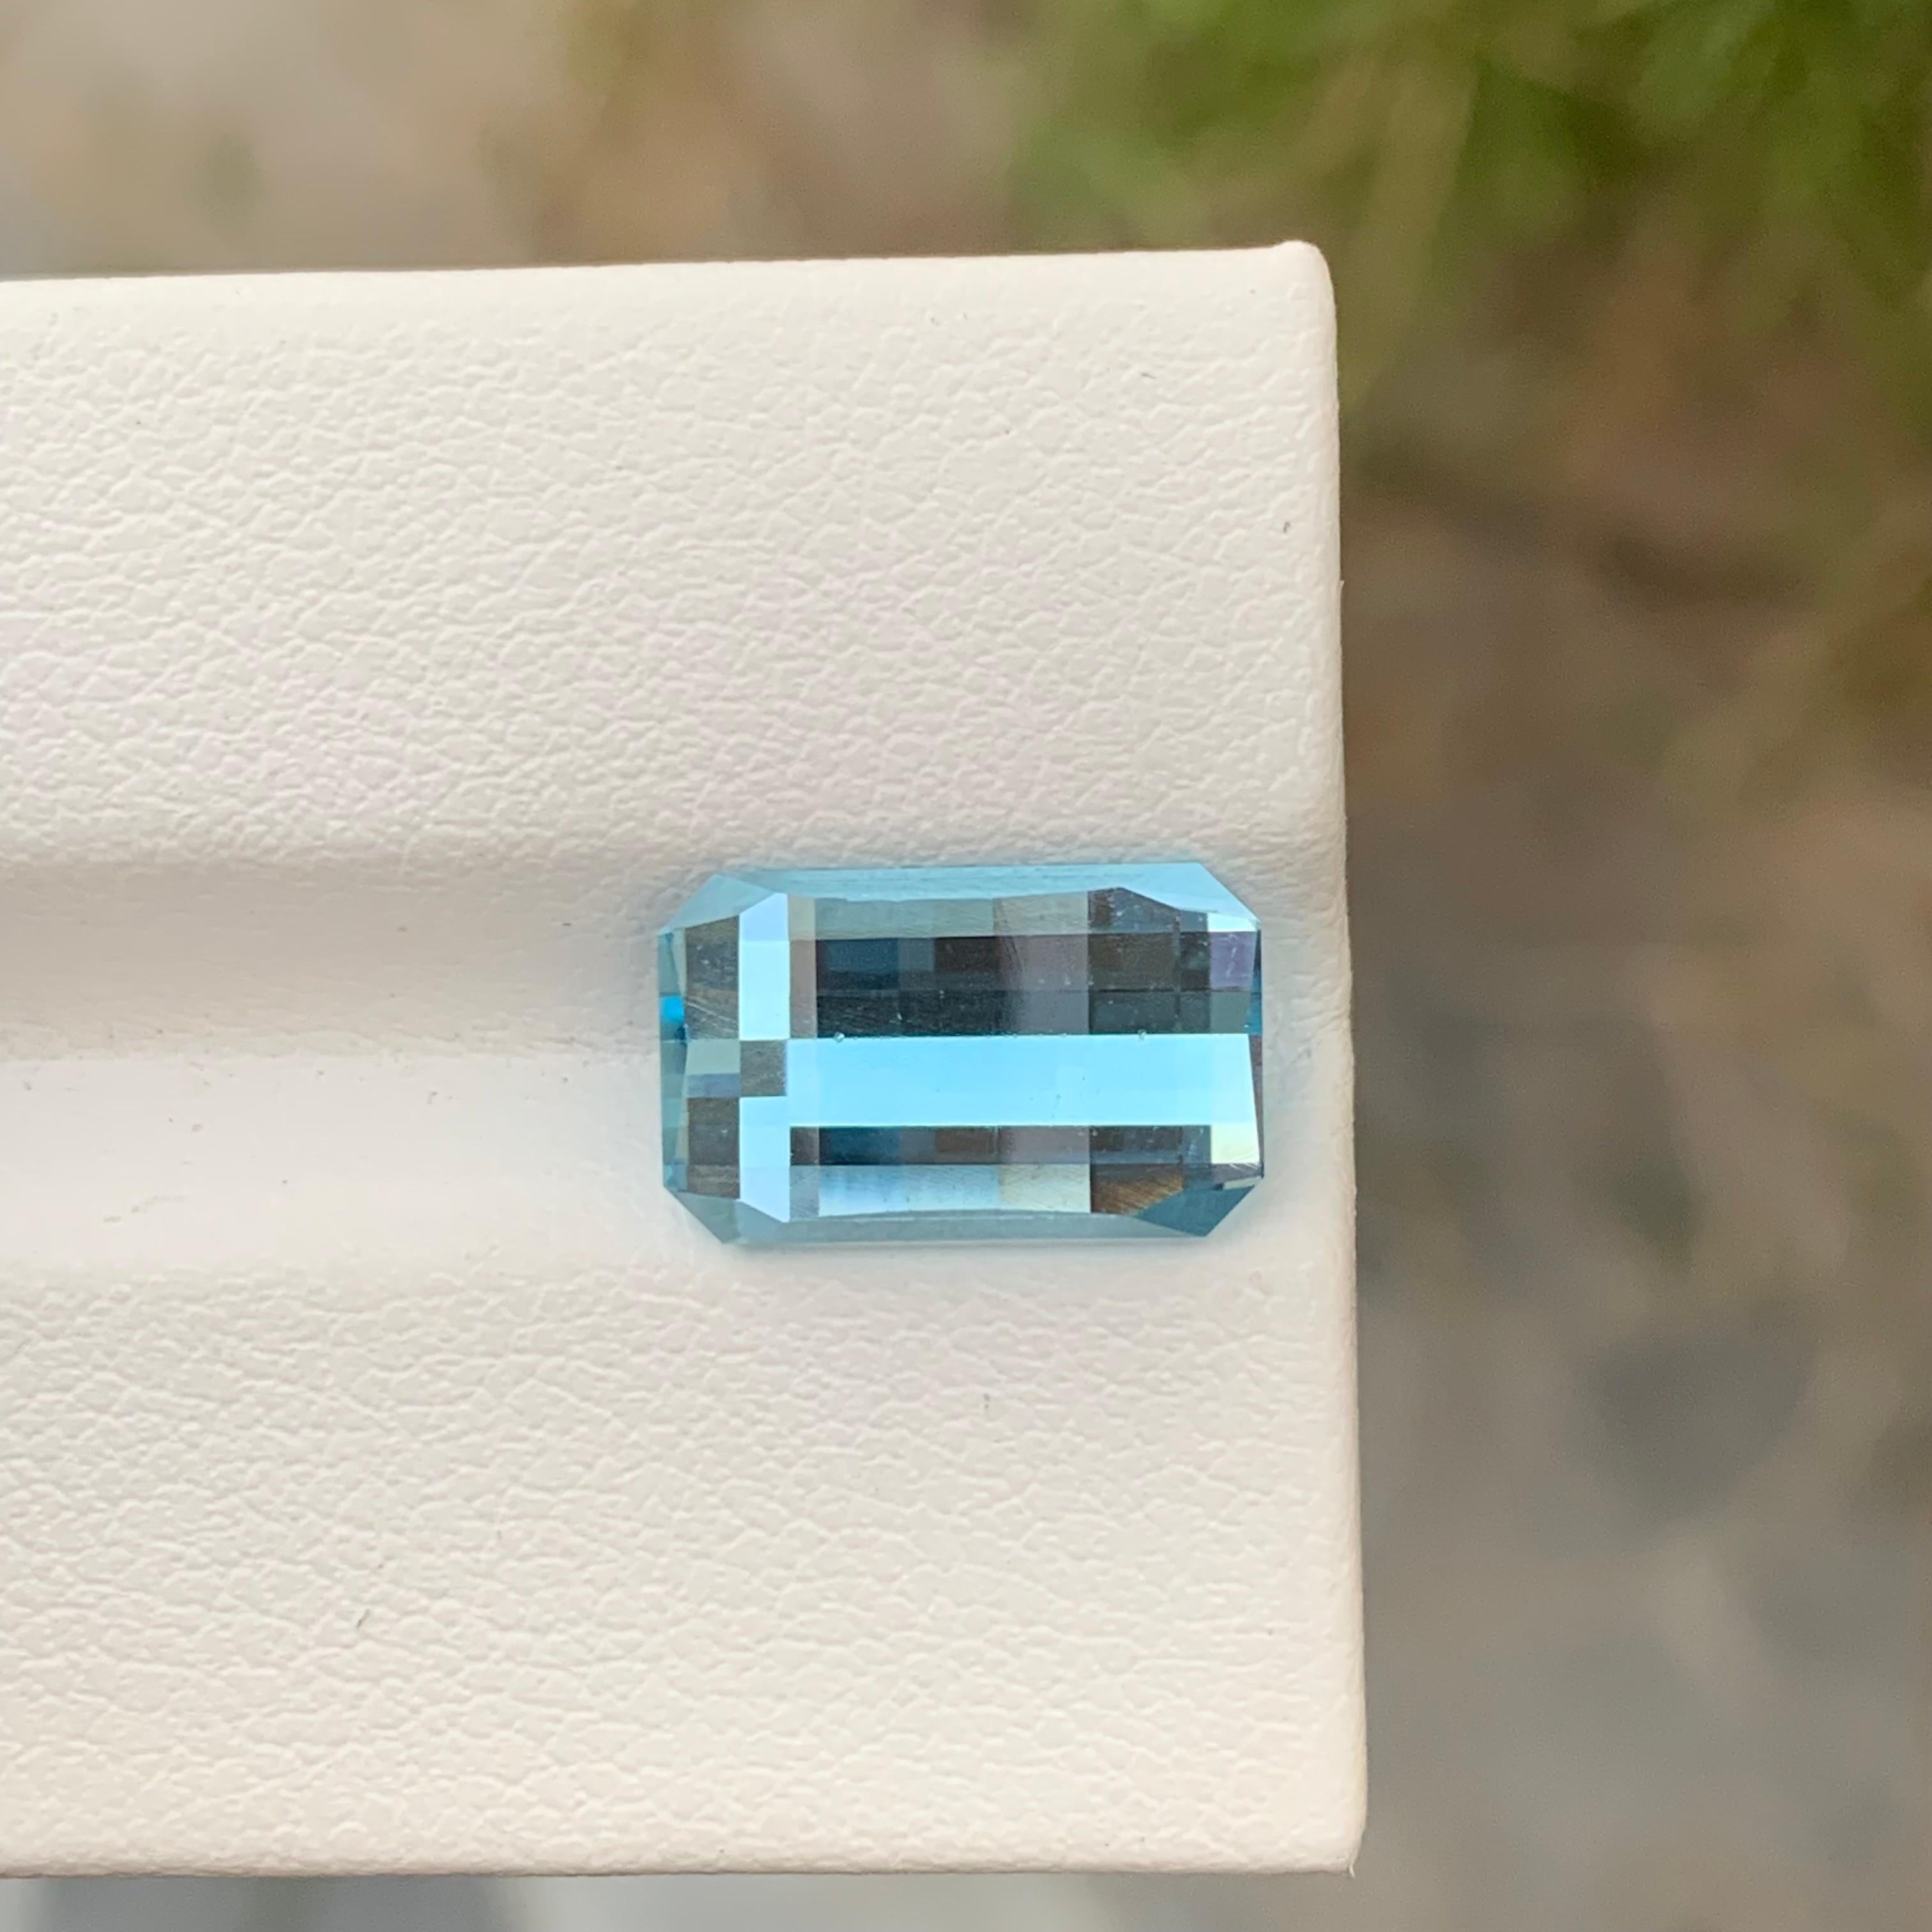 Stunning 6.15 Carats Pixelated Cut Loose Sky Blue Topaz Earth Mine Ring Gem For Sale 4